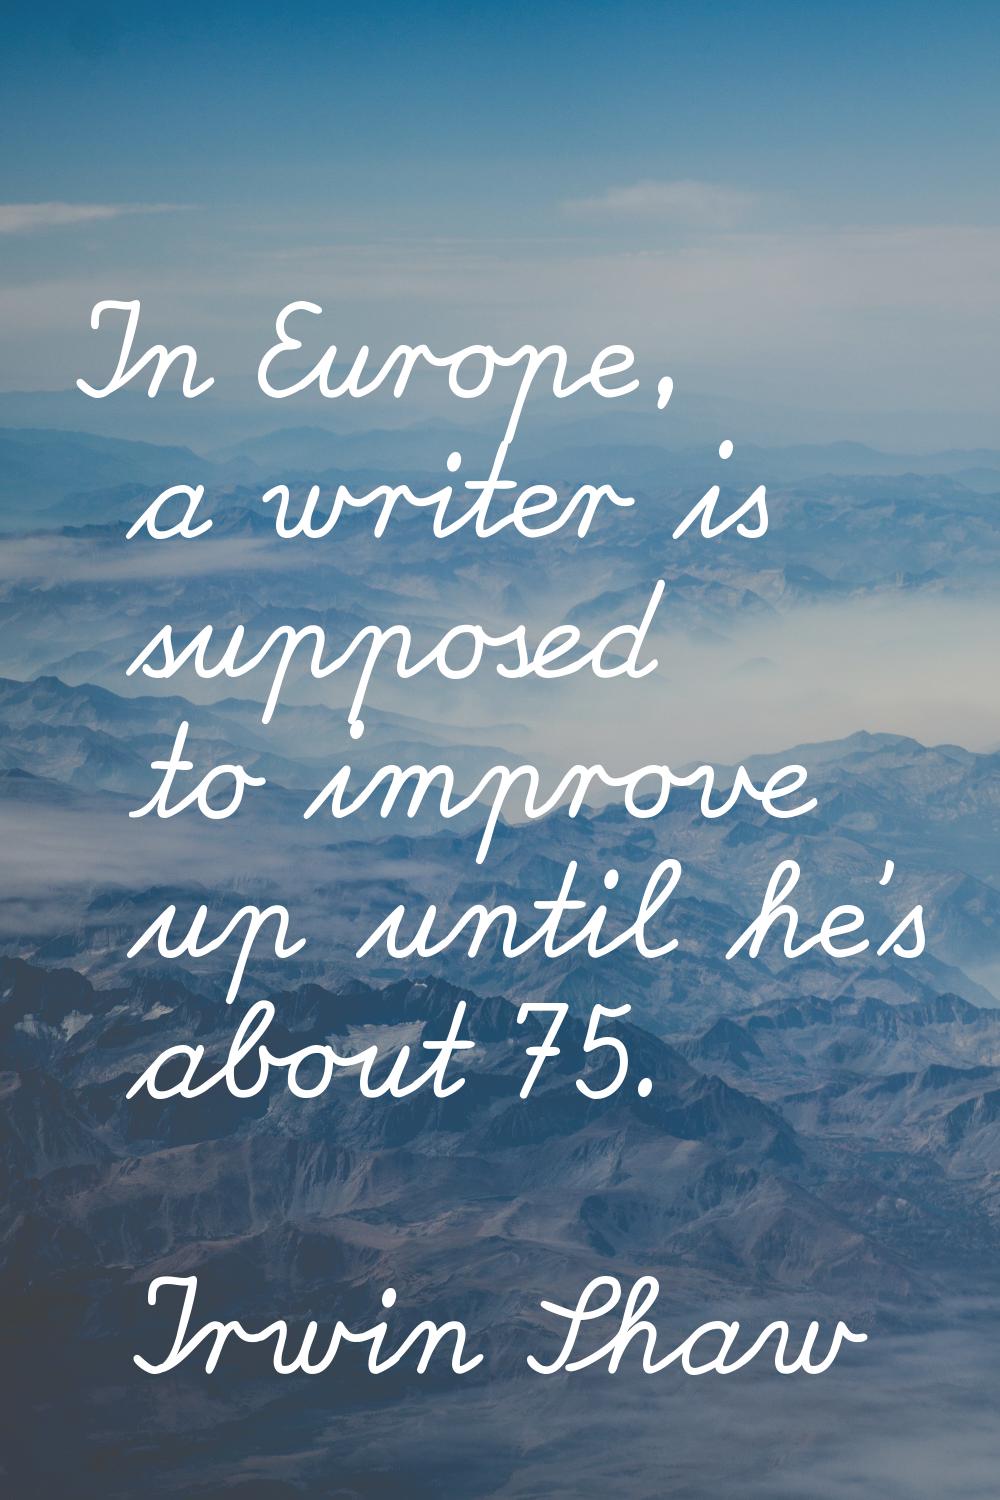 In Europe, a writer is supposed to improve up until he's about 75.